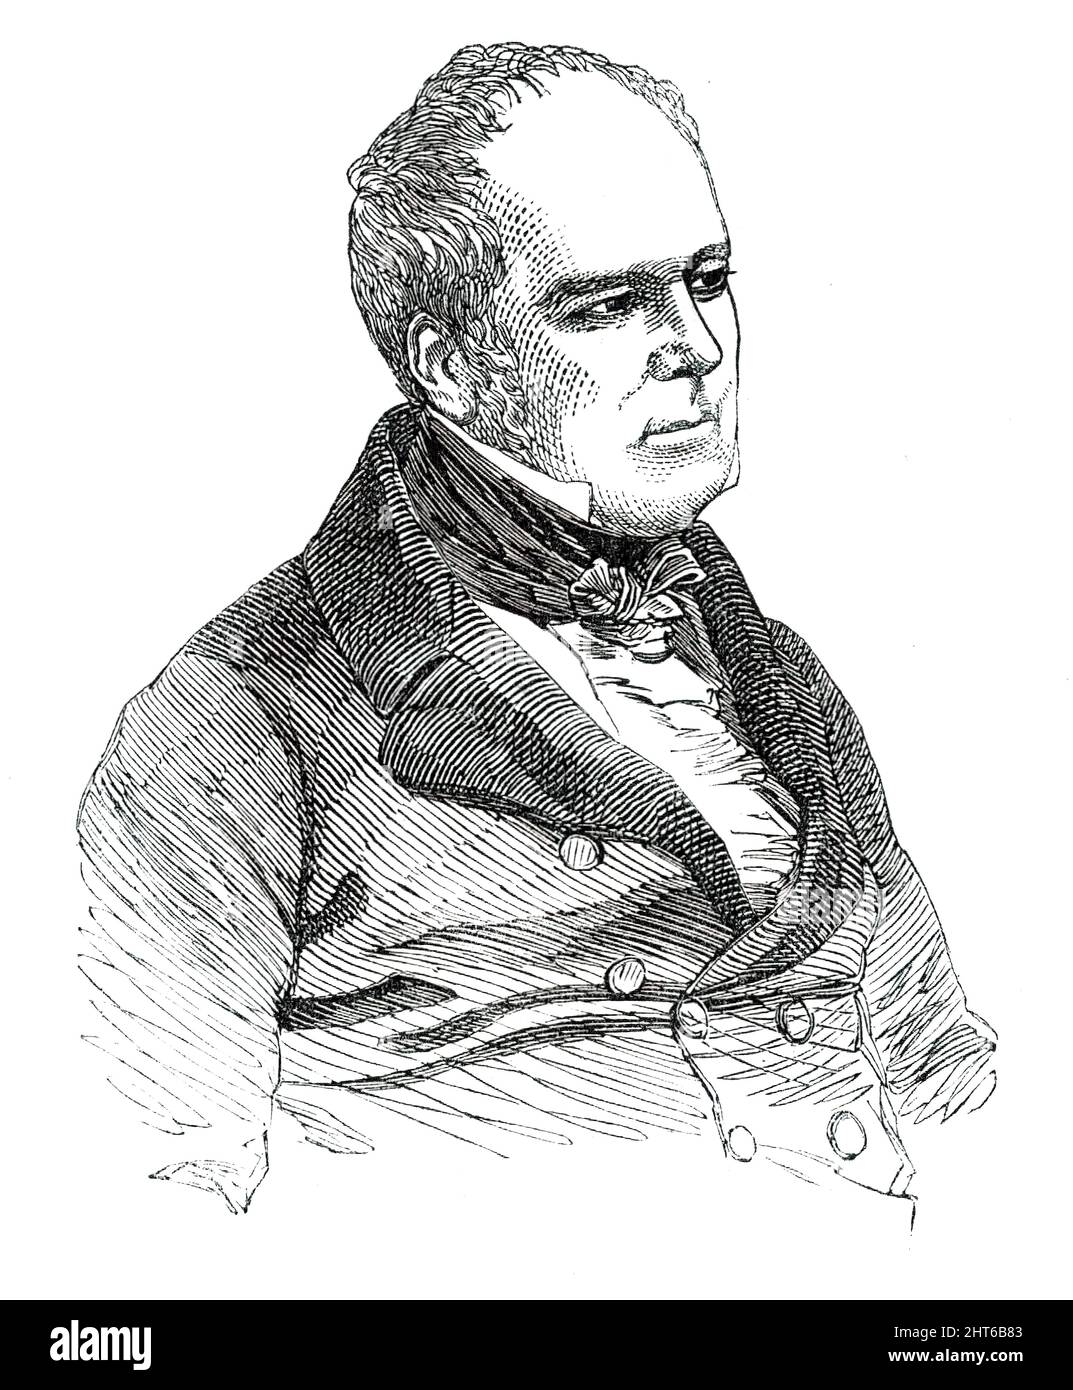 The Right Hon. Andrew Rutherfurd, M.P. (for the Leith District), Lord Advocate of Scotland, 1850. 'The then condition of the gaols would now scarce gain belief. There was no classification; no separation of the convicted from those waiting trial; no attention to cleanliness, morality, or health; the prisons were damp, dark, filthy, crowded; certain moral destruction to all who were sent, even for a brief period, within their walls; and, in short, an abomination and disgrace to any civilised country. Mr. Rutherfurd...brought in and carried an Act effecting an entire reform in the supervision, m Stock Photo